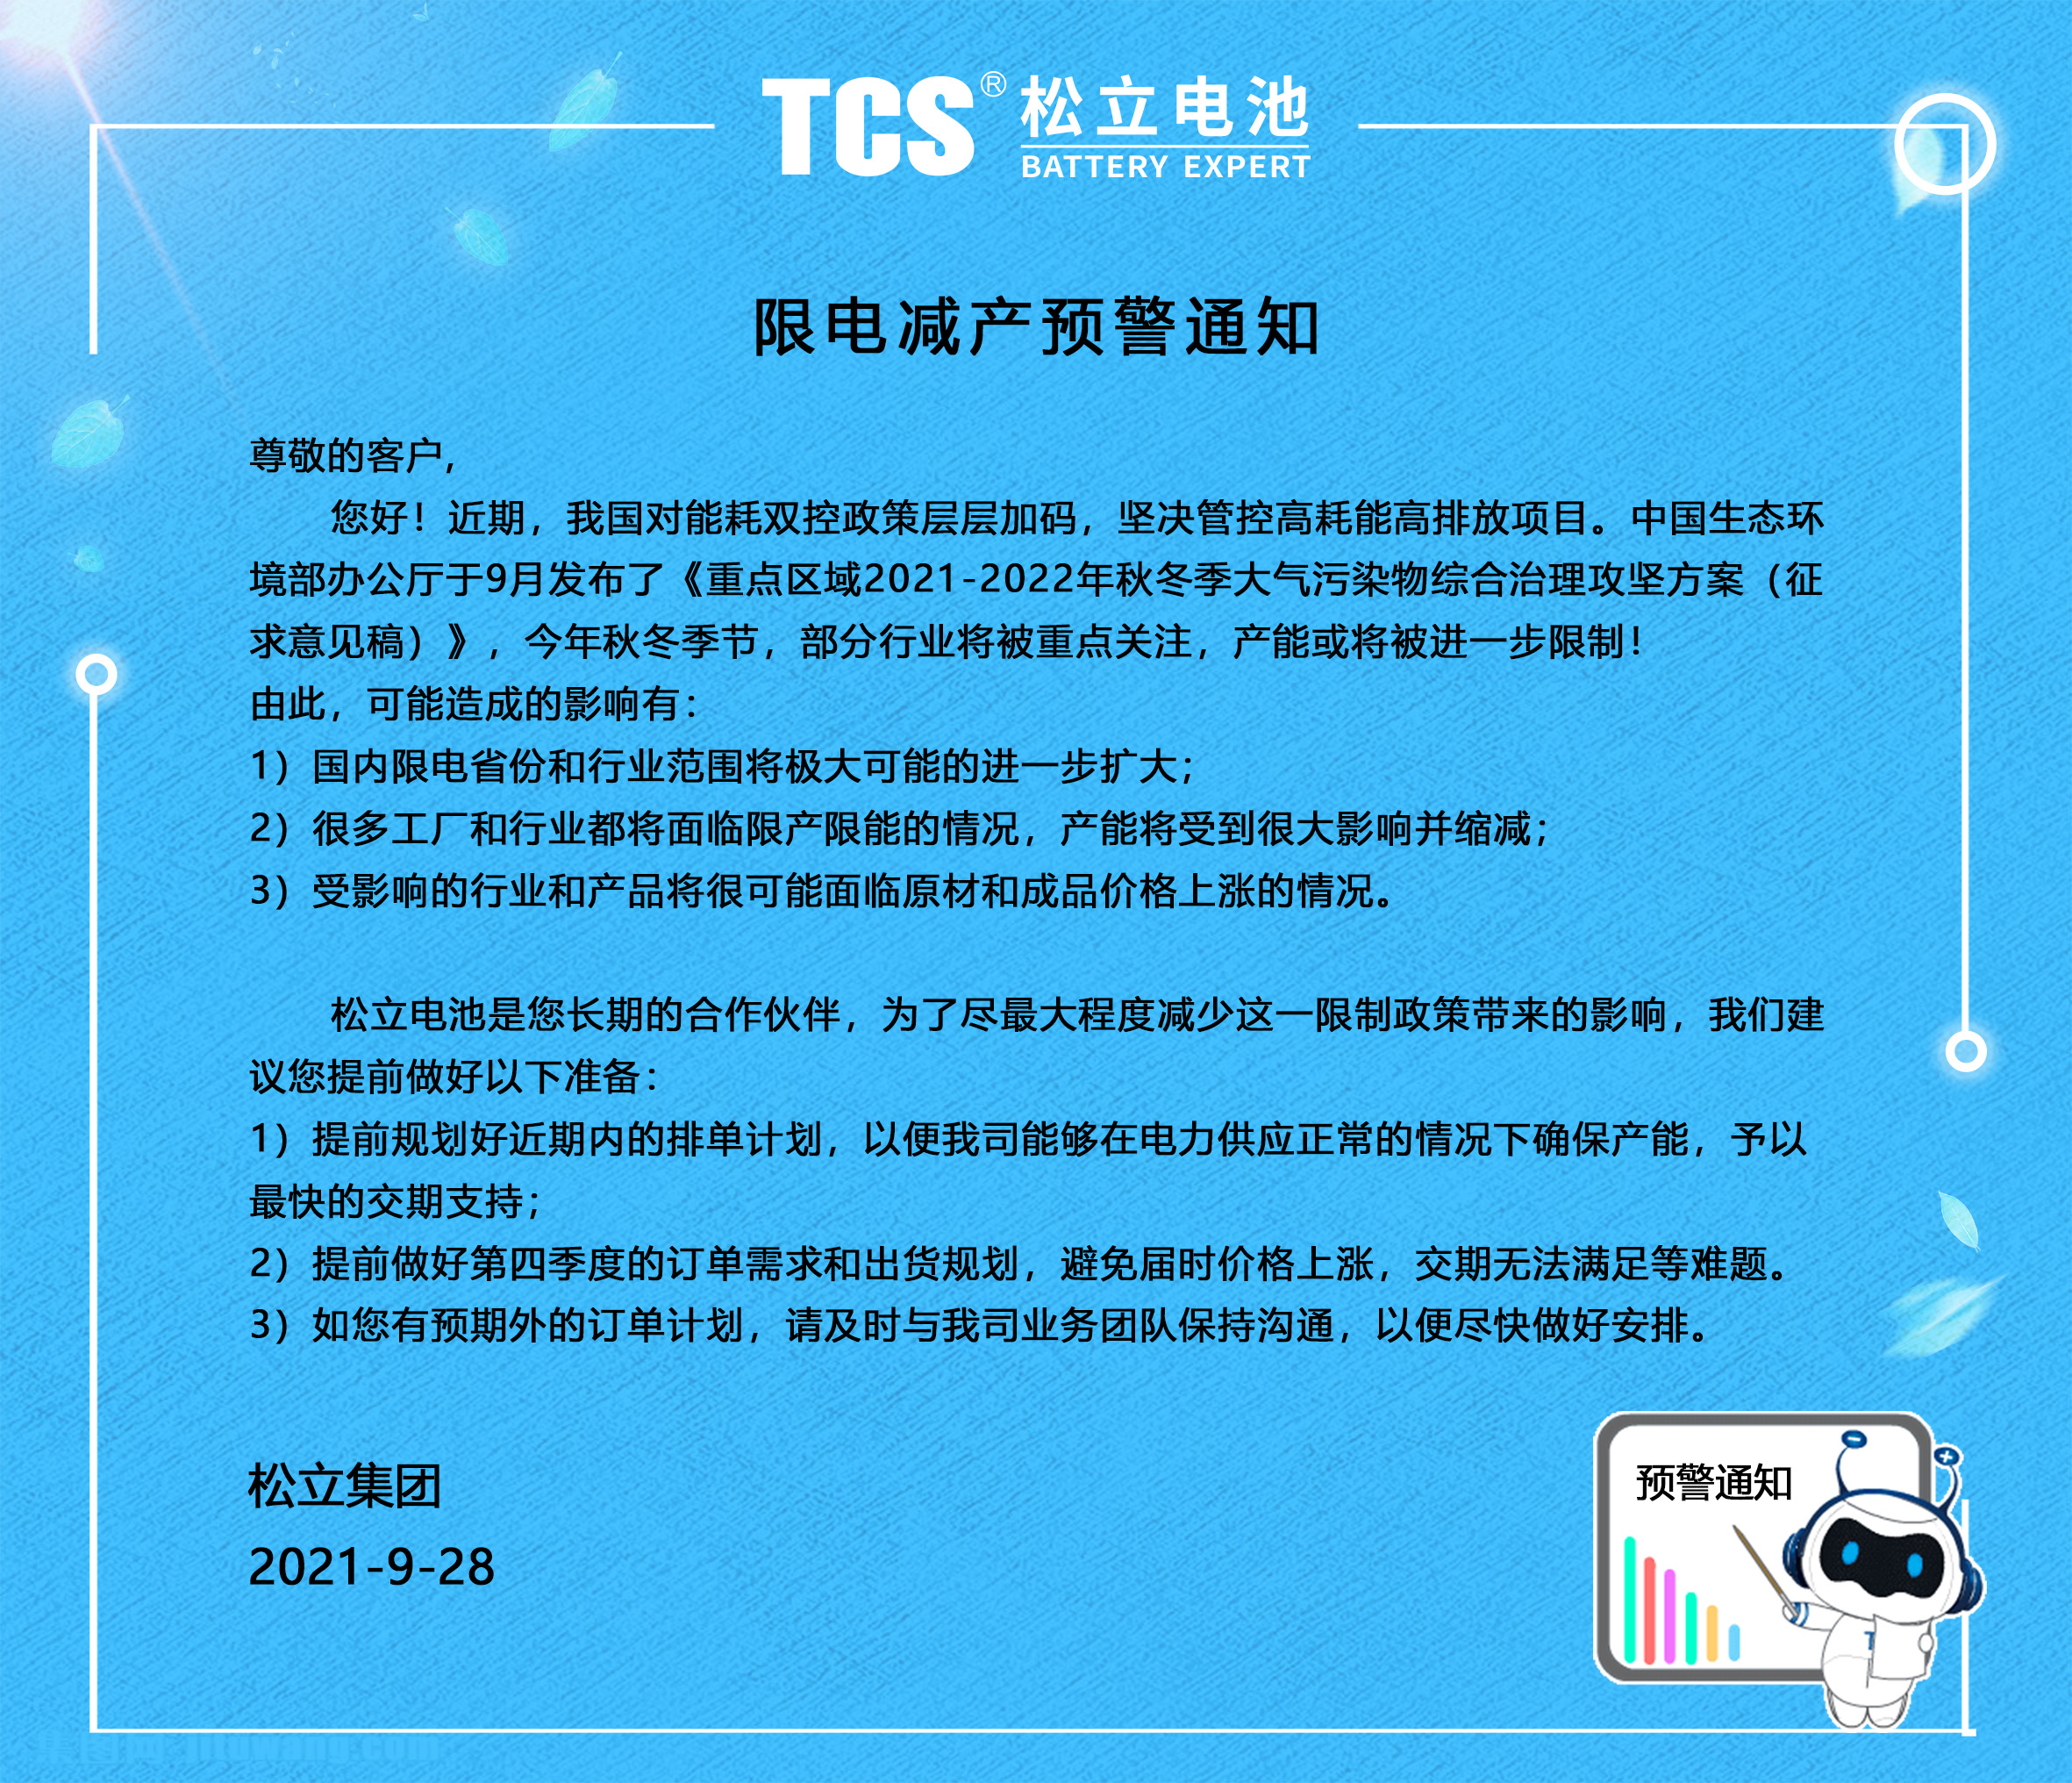 TCS SONGLI BATTERY Notice of Power Curtailment and Production Reduction